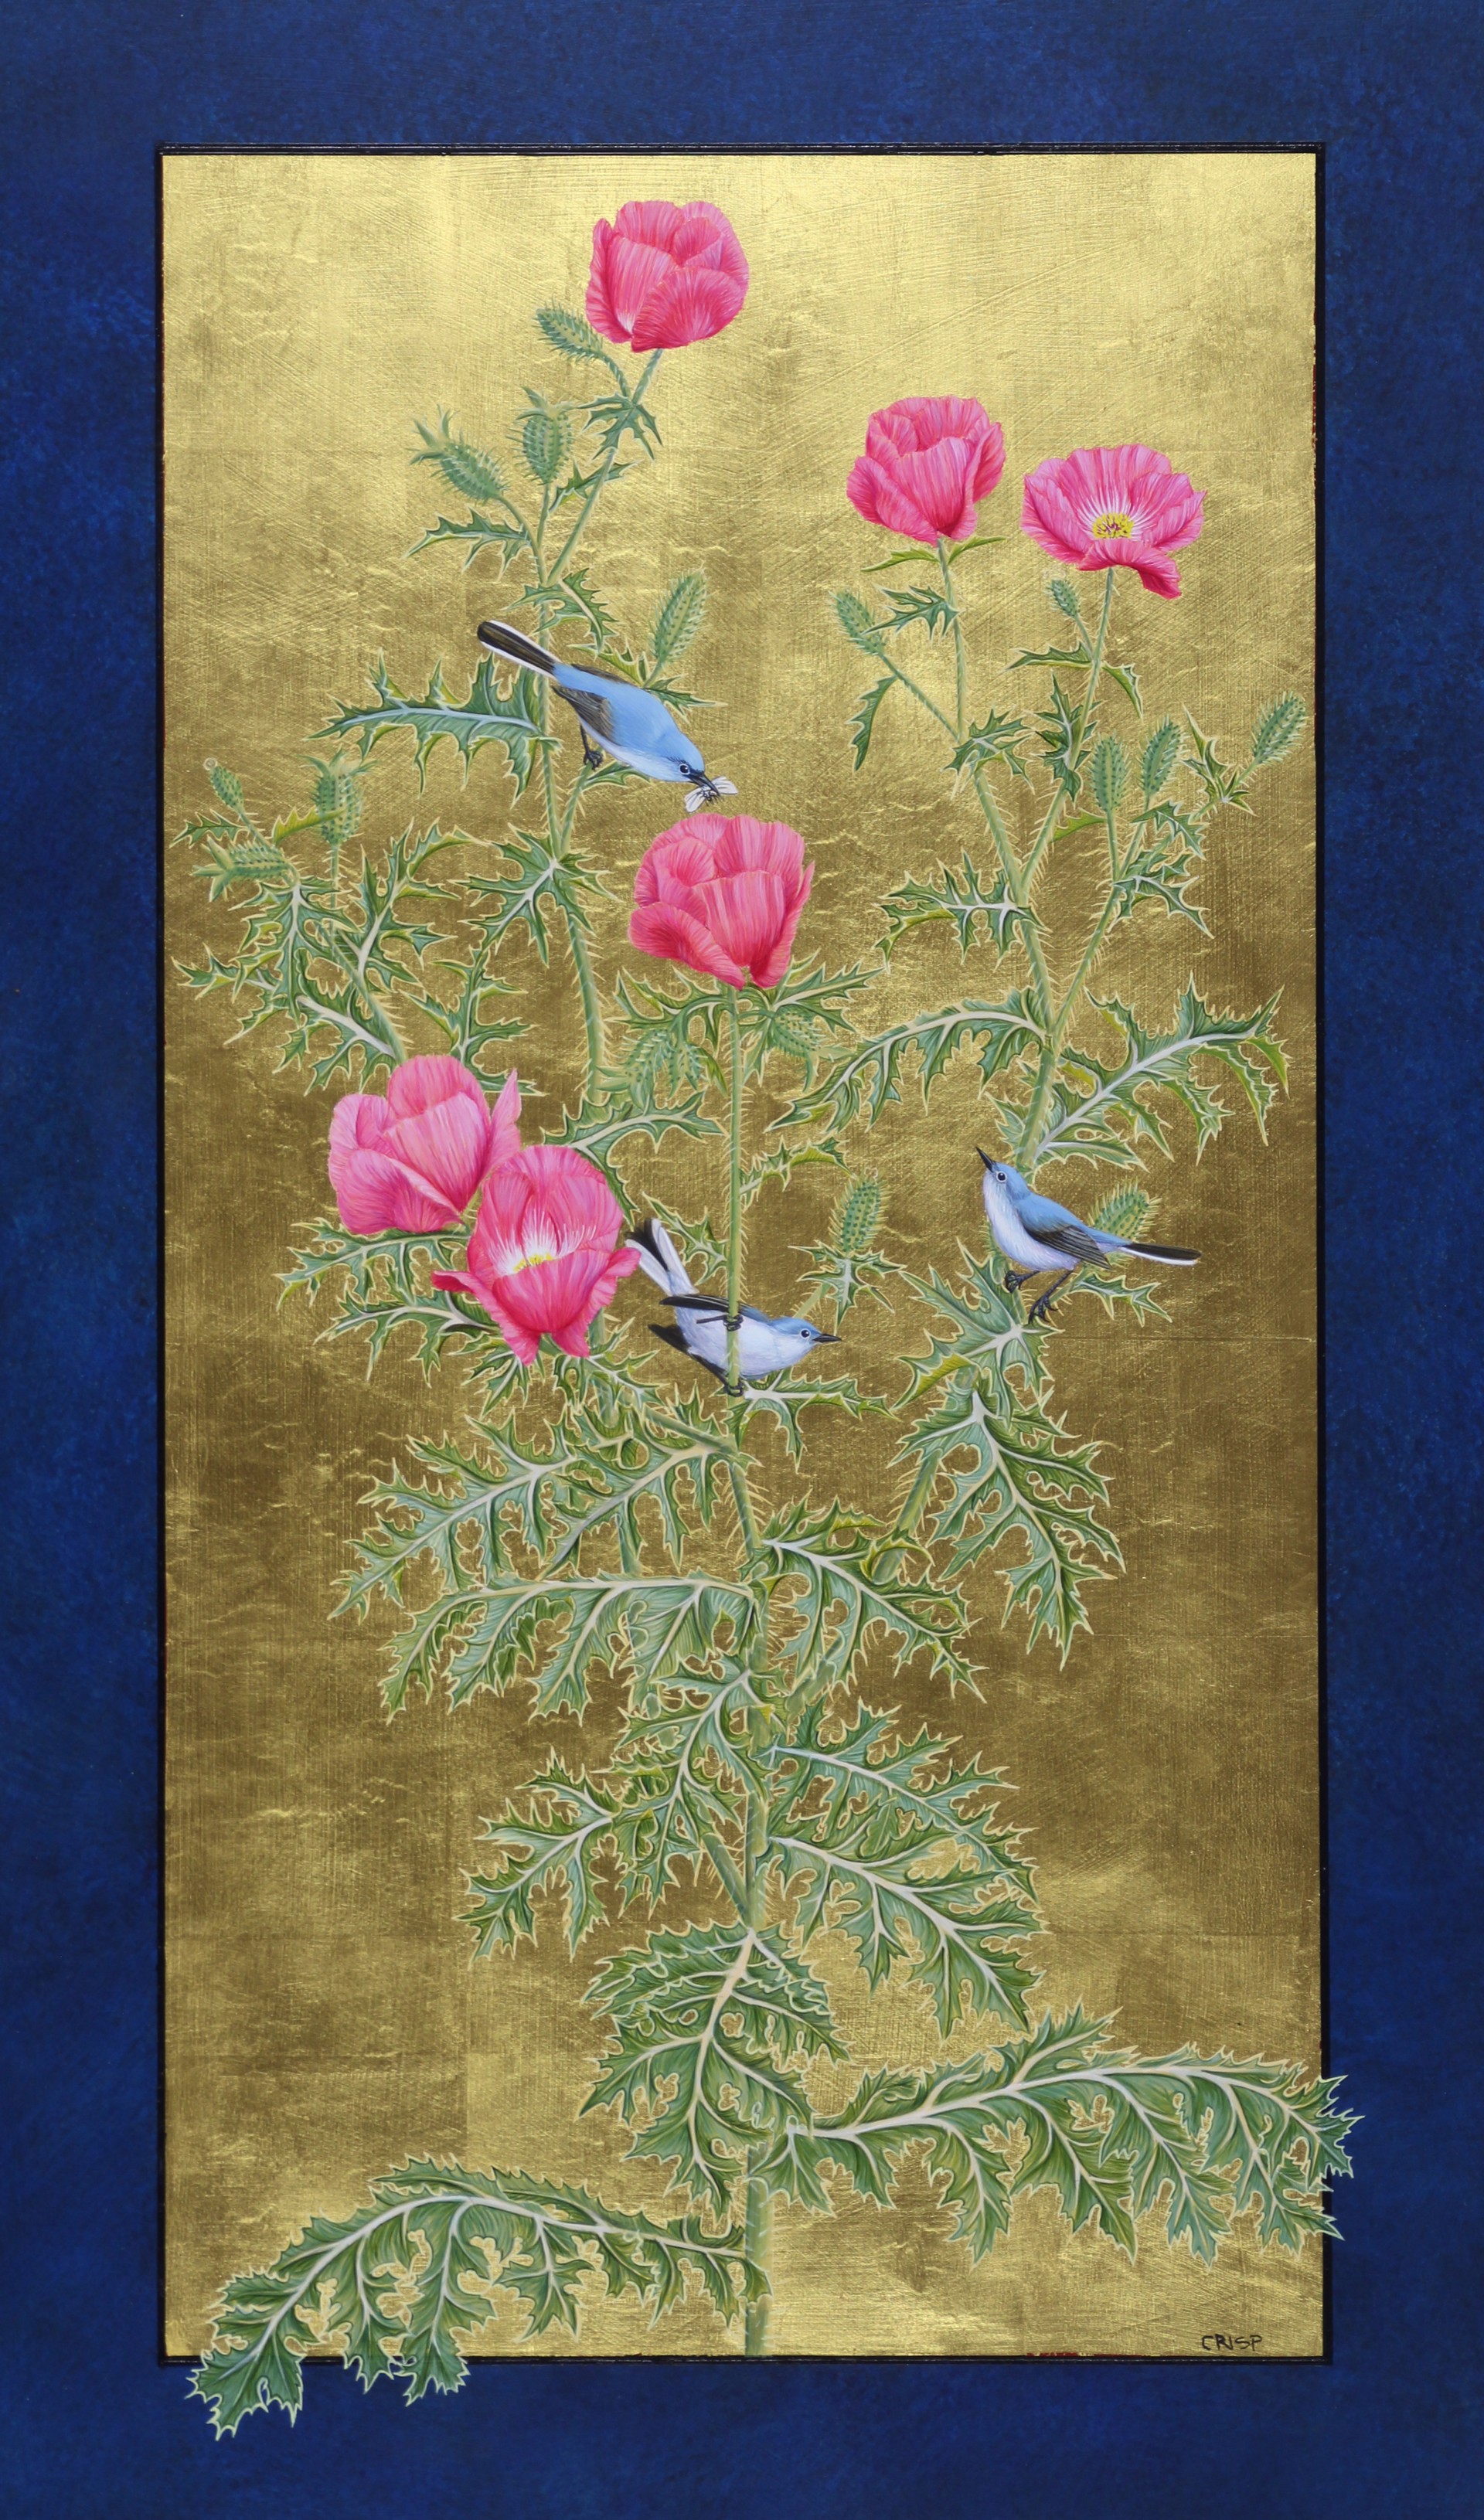 Rose Prickly Poppy and Blue-gray Gnatcatchers by Margie Crisp